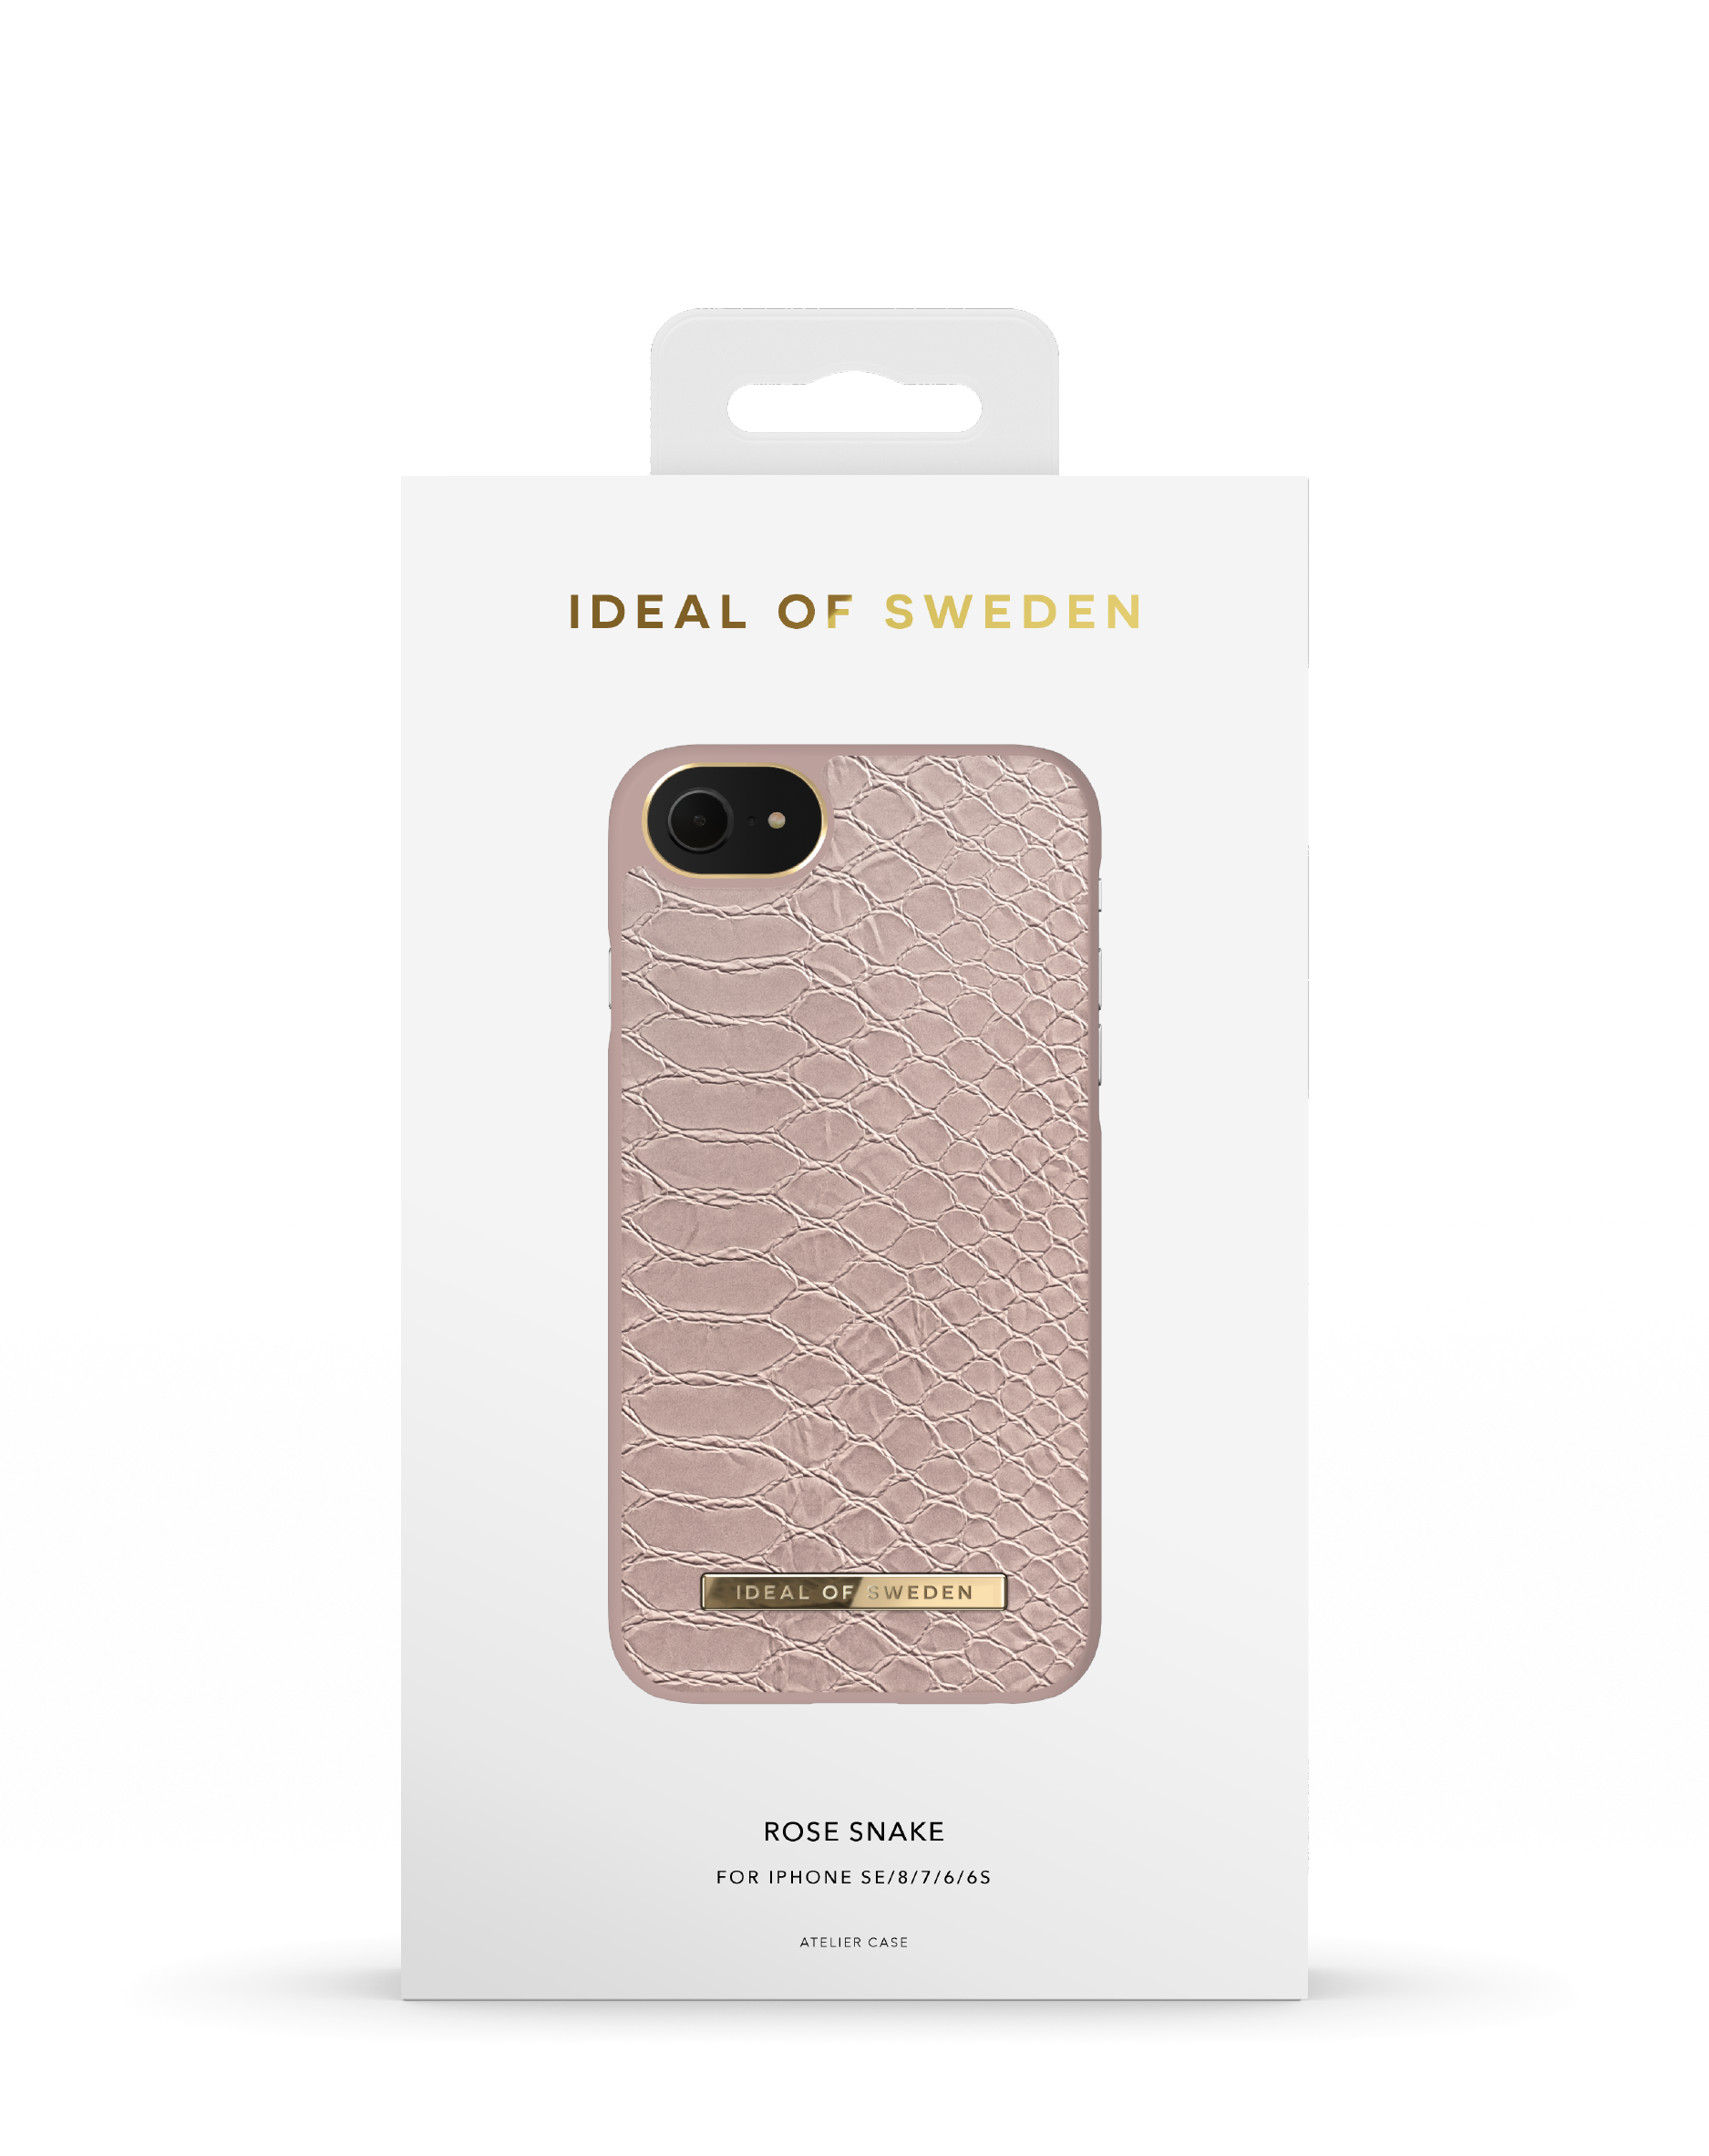 IDEAL OF iPhone SE iPhone Apple 8, Backcover, Apple Rose Apple, 6(S), SWEDEN iPhone Apple IDACAW20-I7-244, 7, Snake (2020), Apple iPhone